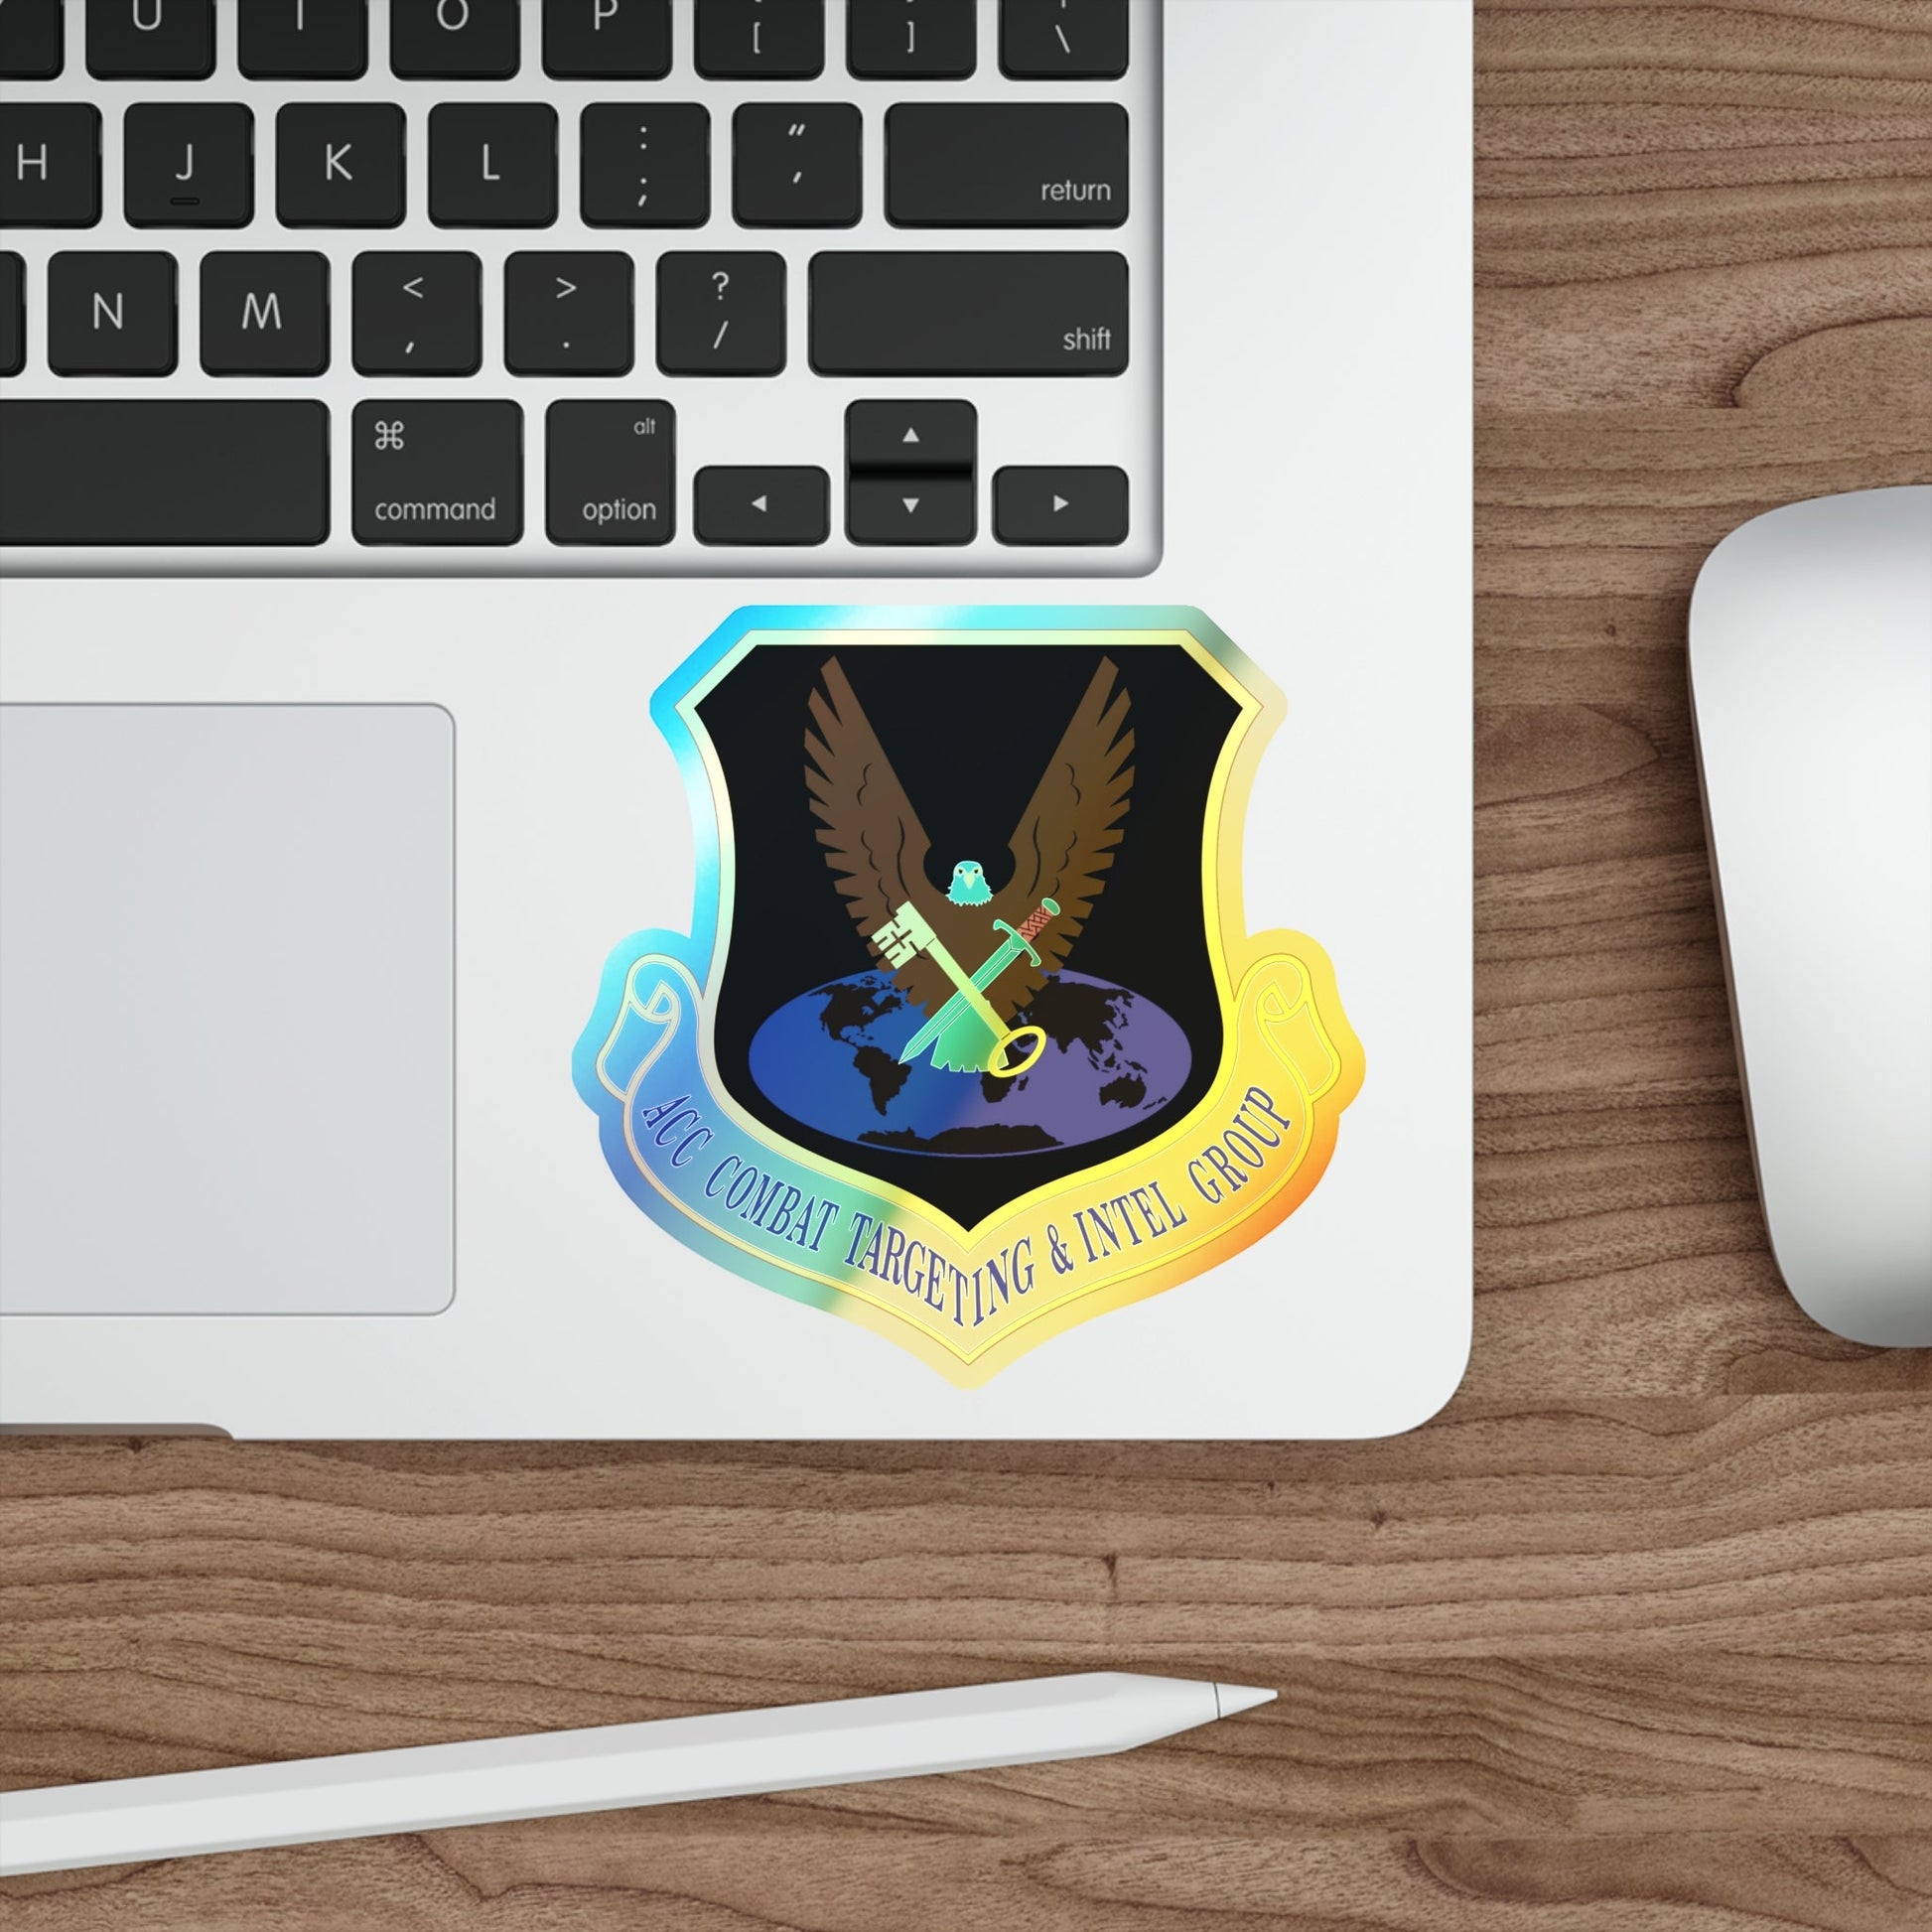 ACC Combat Targeting & Intelligence Group (U.S. Air Force) Holographic STICKER Die-Cut Vinyl Decal-The Sticker Space